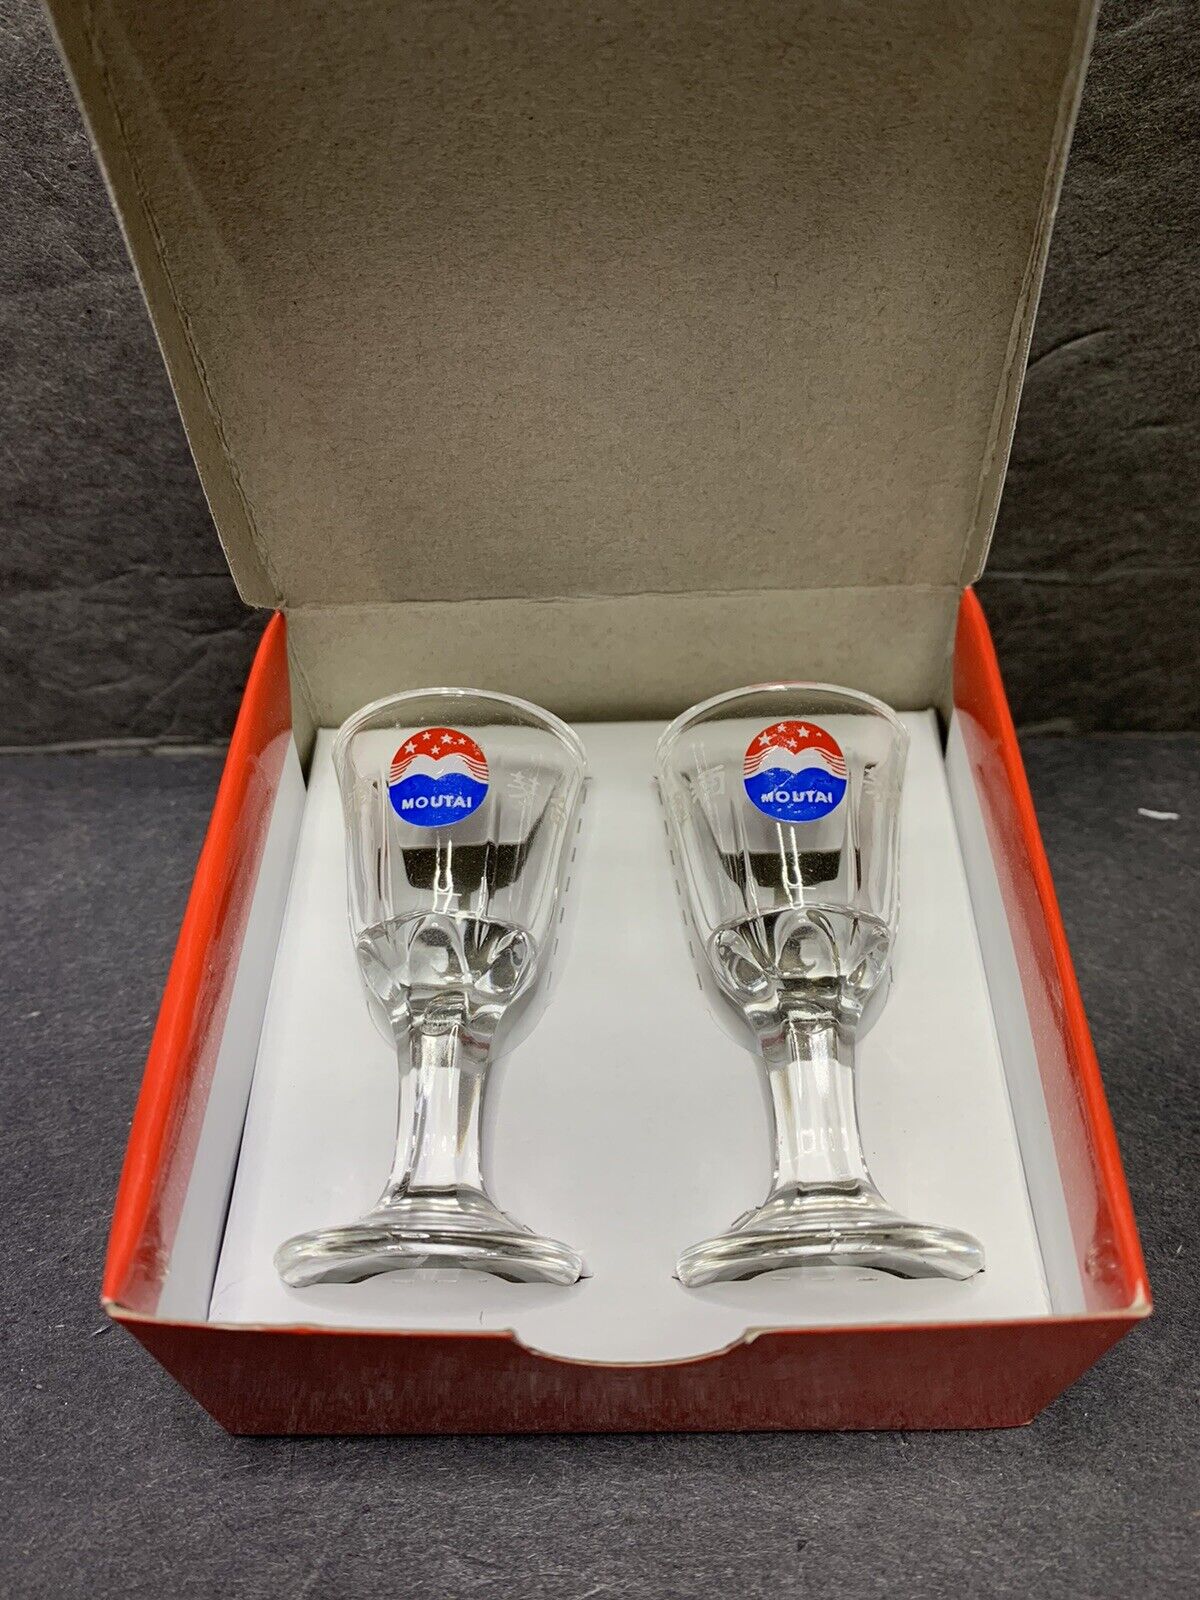 Authentic Kweichow Moutai Liquor Shot Glasses (2) in Gift Box